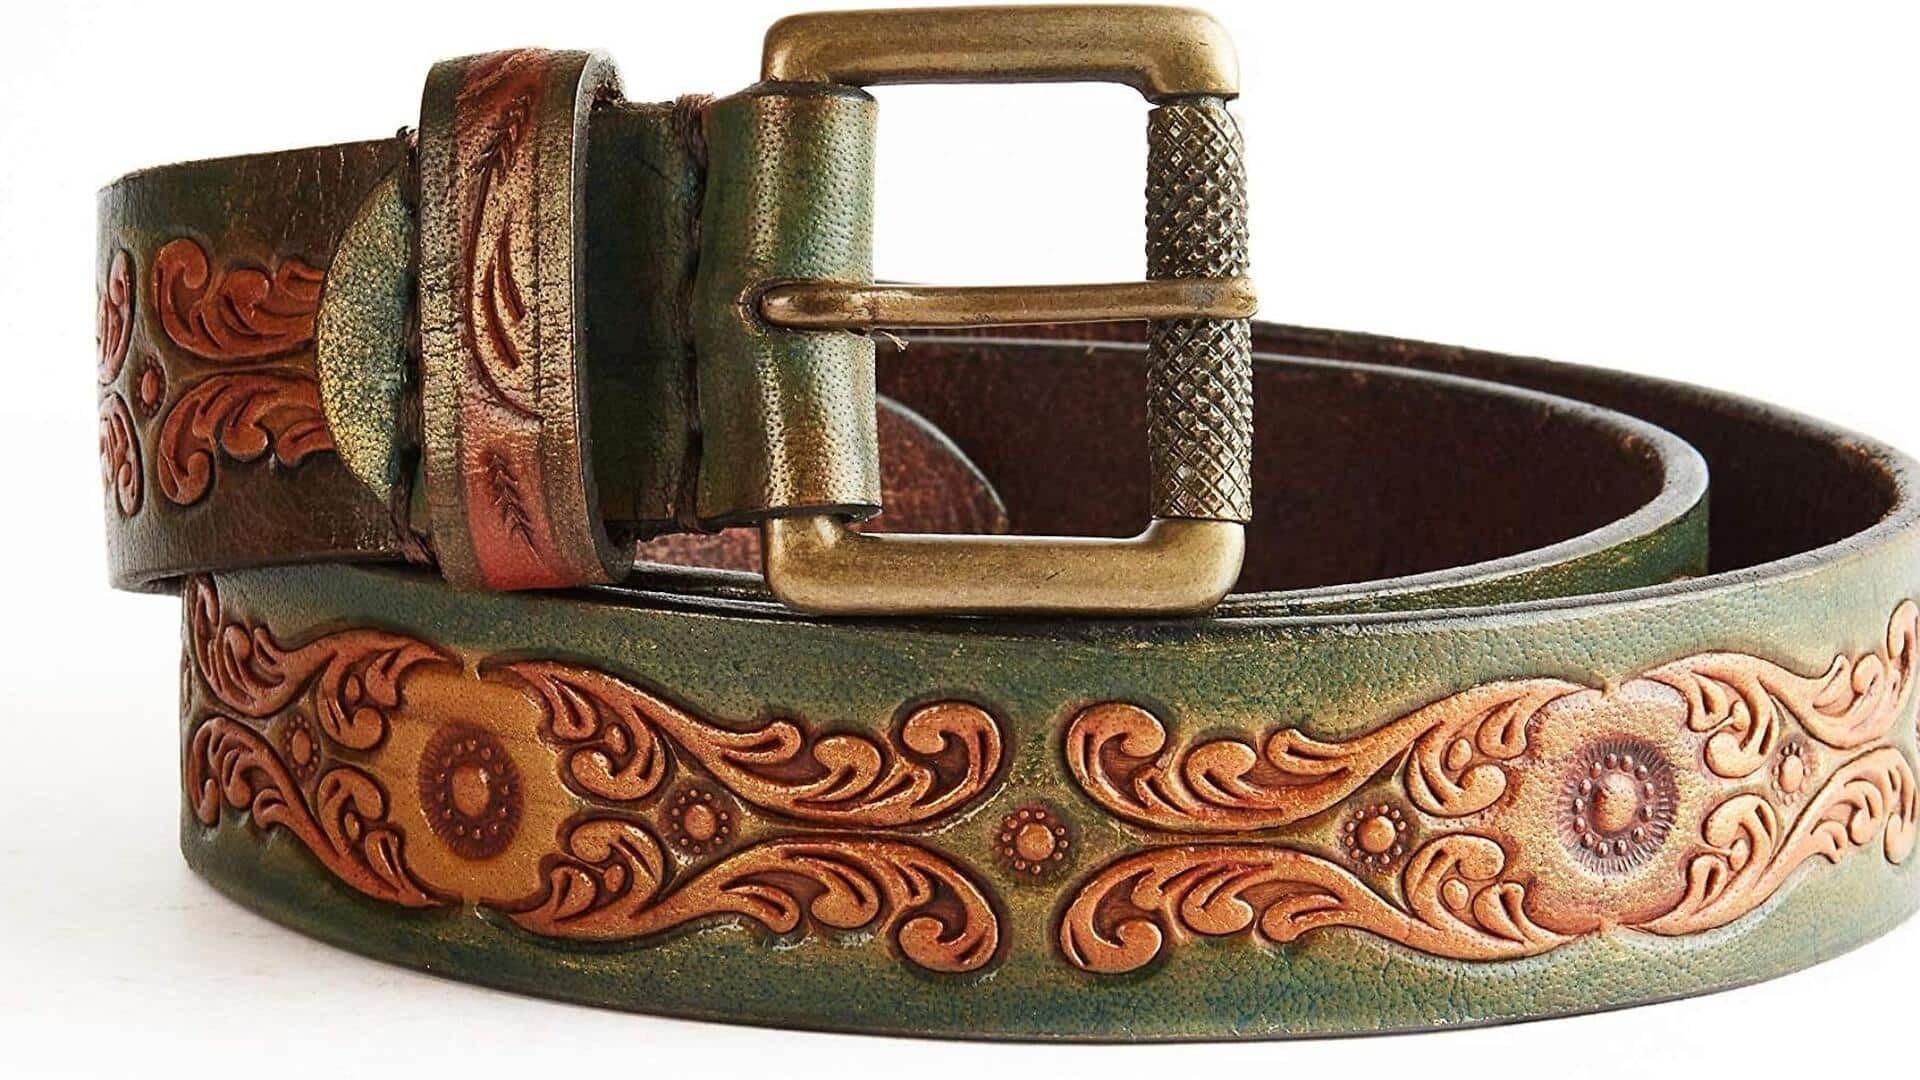 Elevate your style with artisanal belts